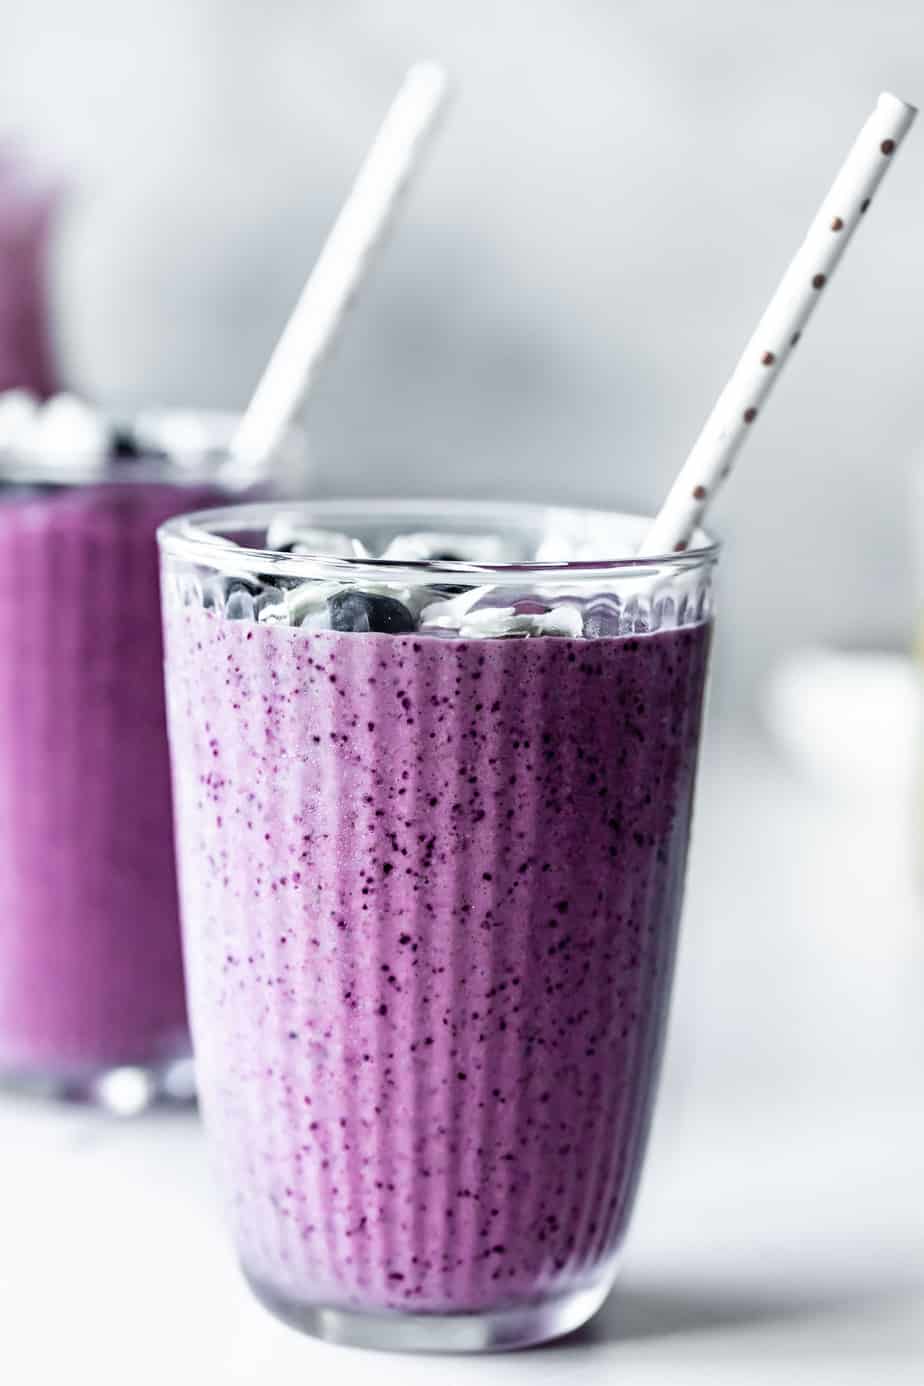 Two smoothies with berries and straws.